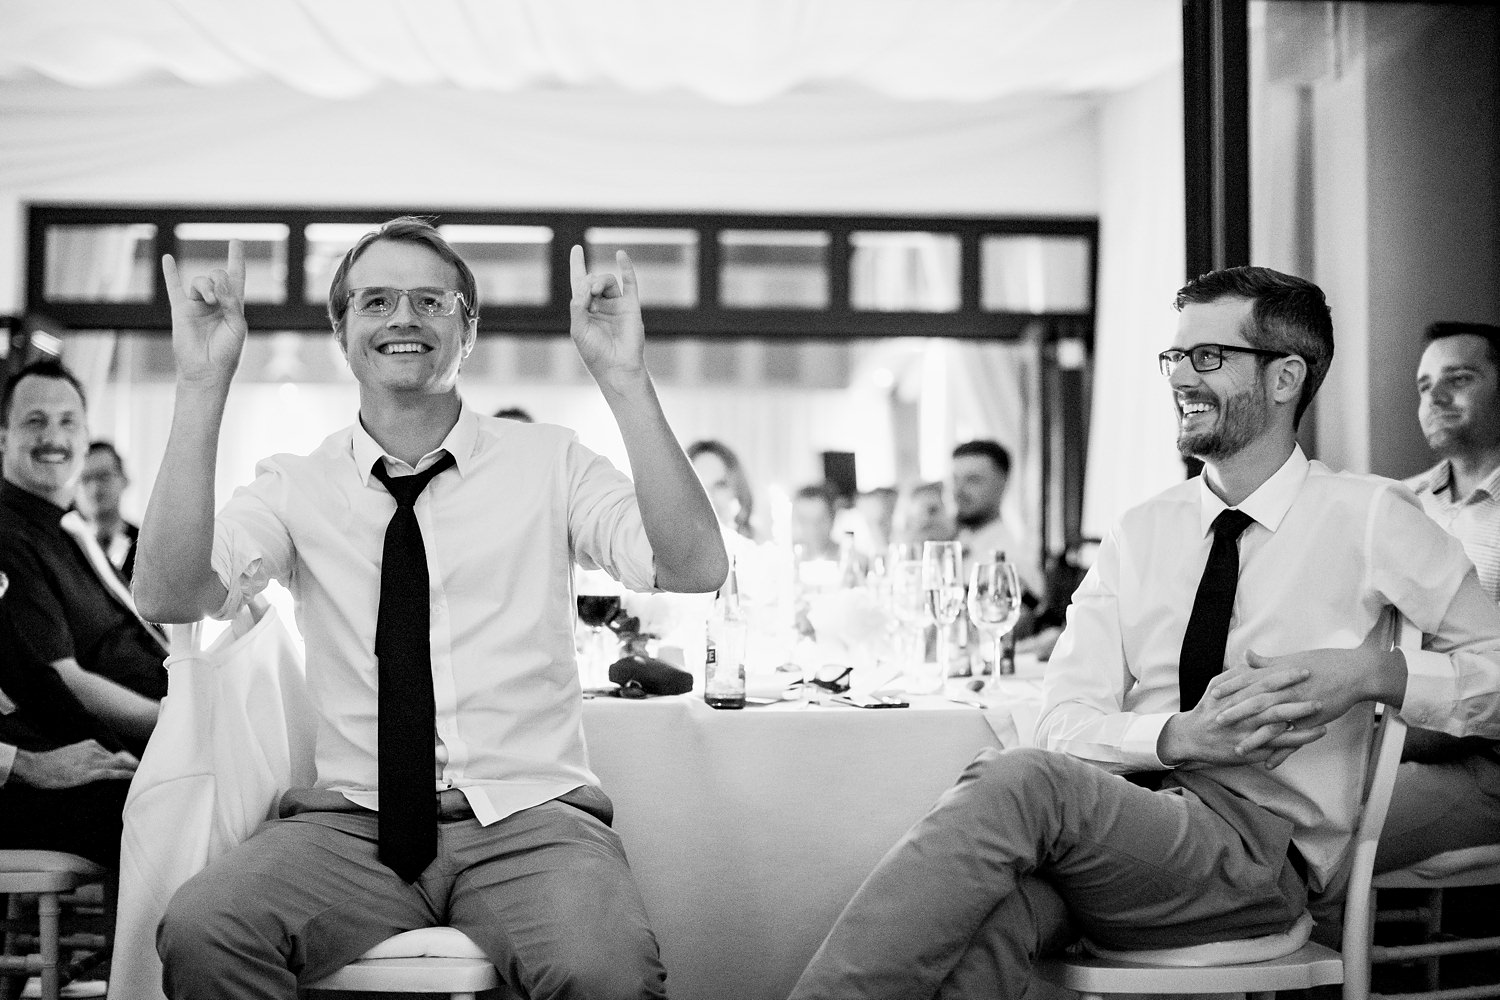 A wedding guest gestures the groom during his speech